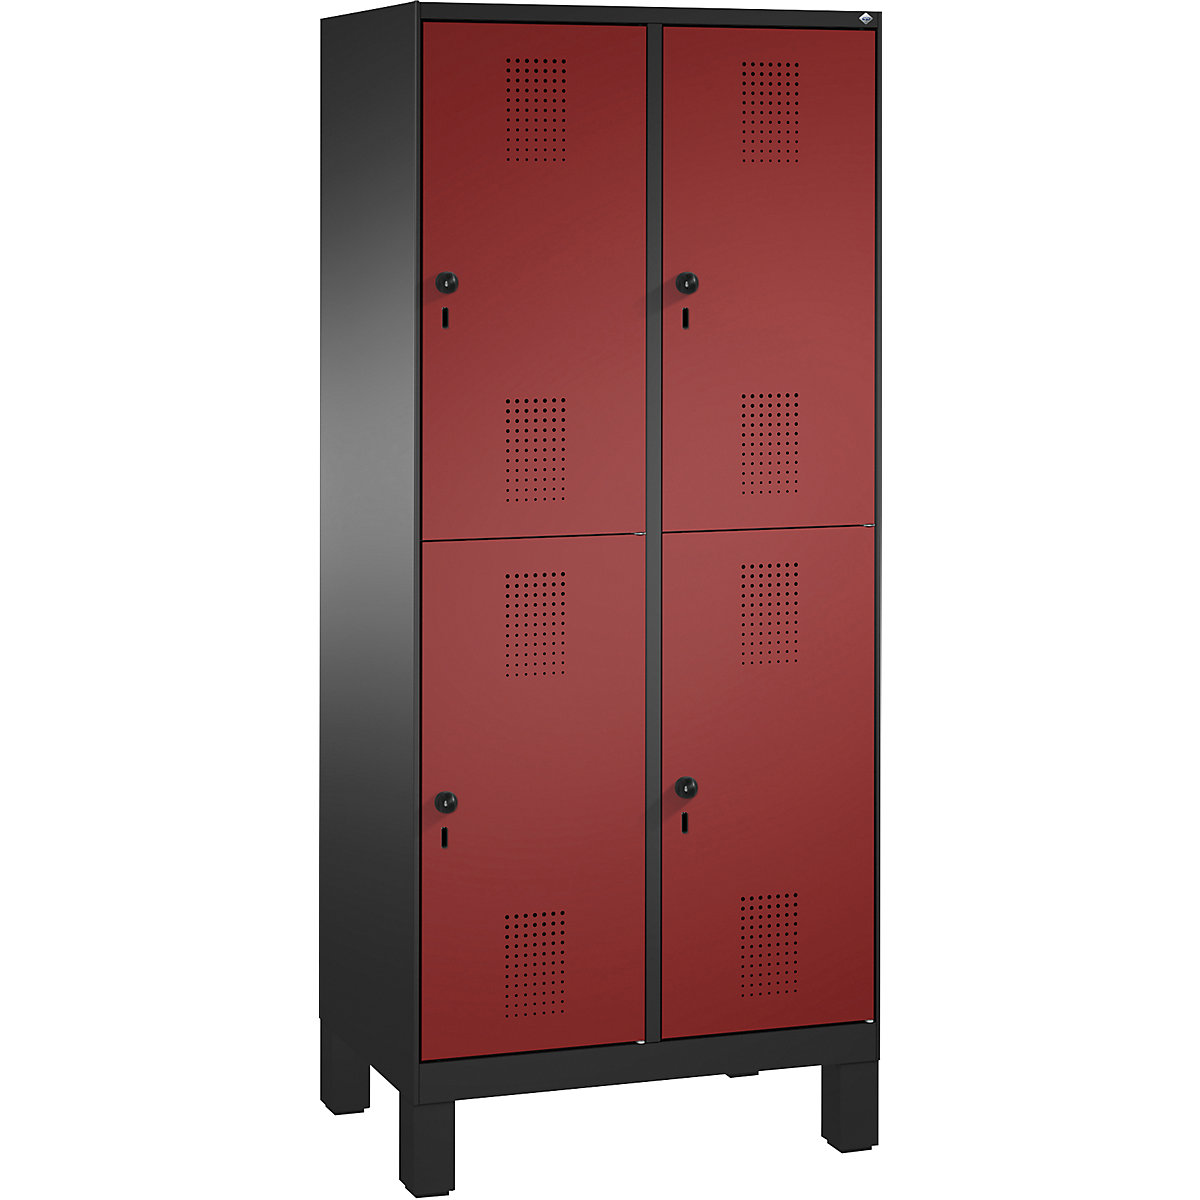 EVOLO cloakroom locker, double tier, with feet – C+P, 2 compartments, 2 shelf compartments each, compartment width 400 mm, black grey / ruby red-14